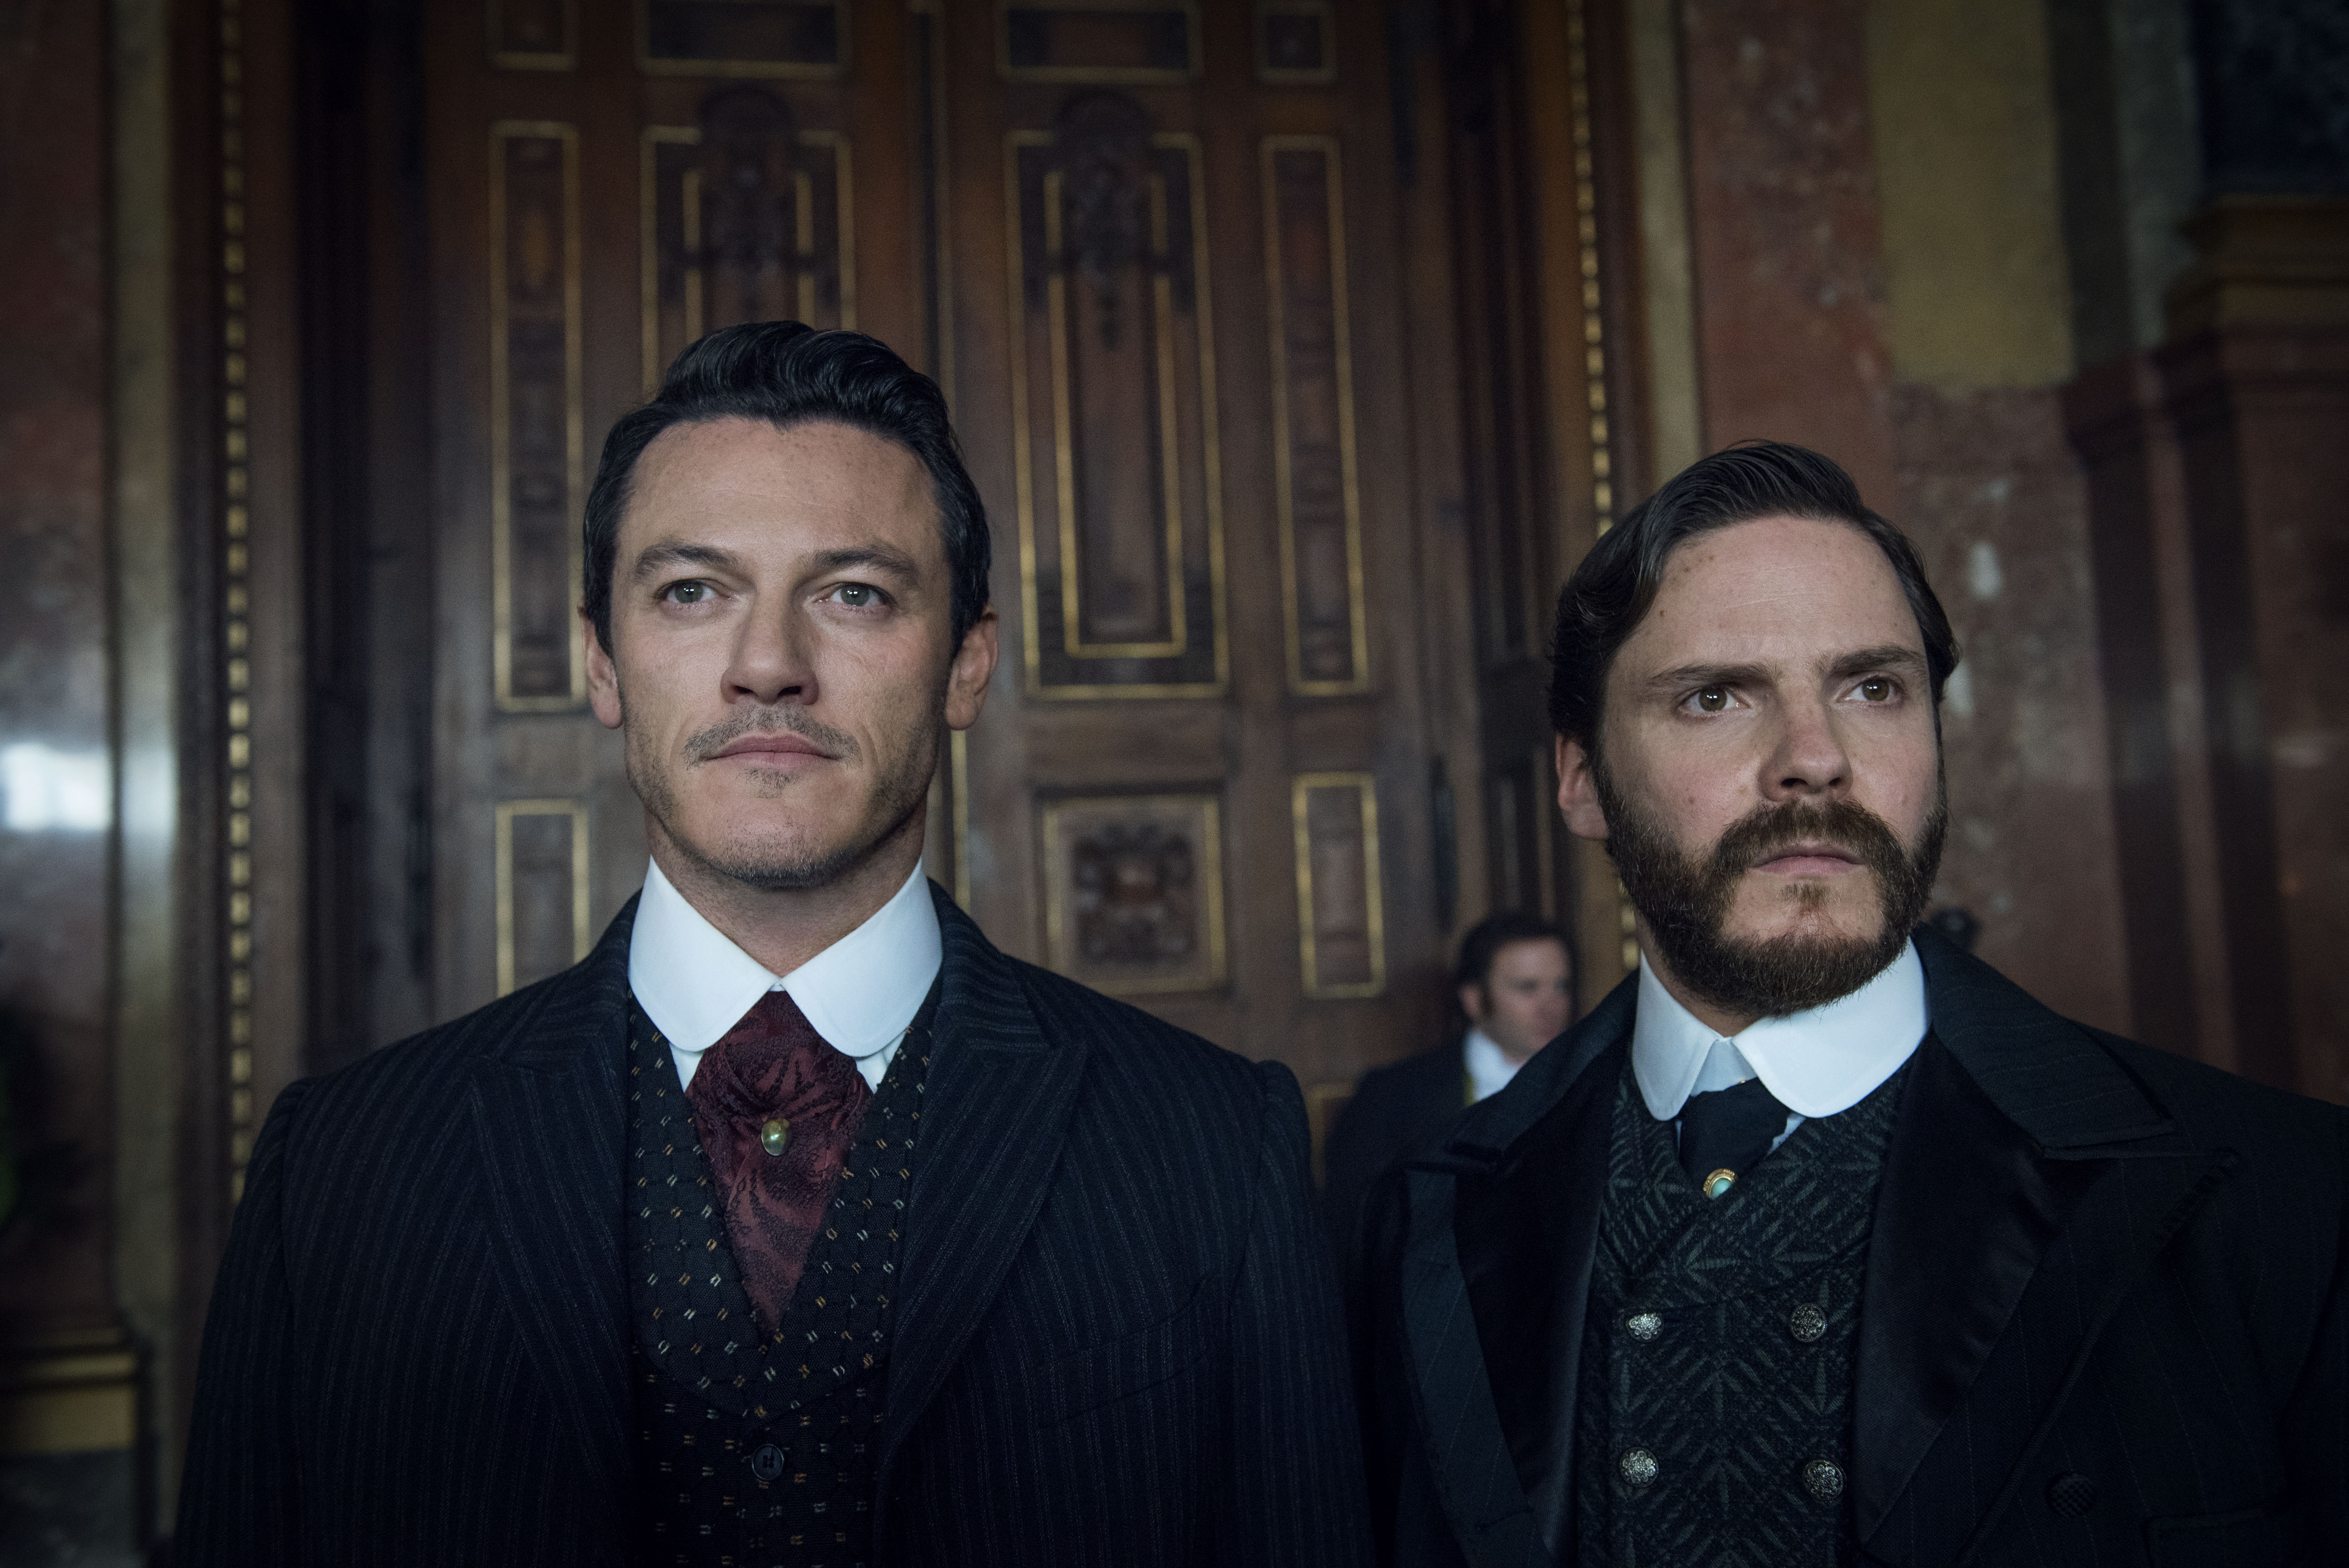 The Alienist 2020 Wallpapers